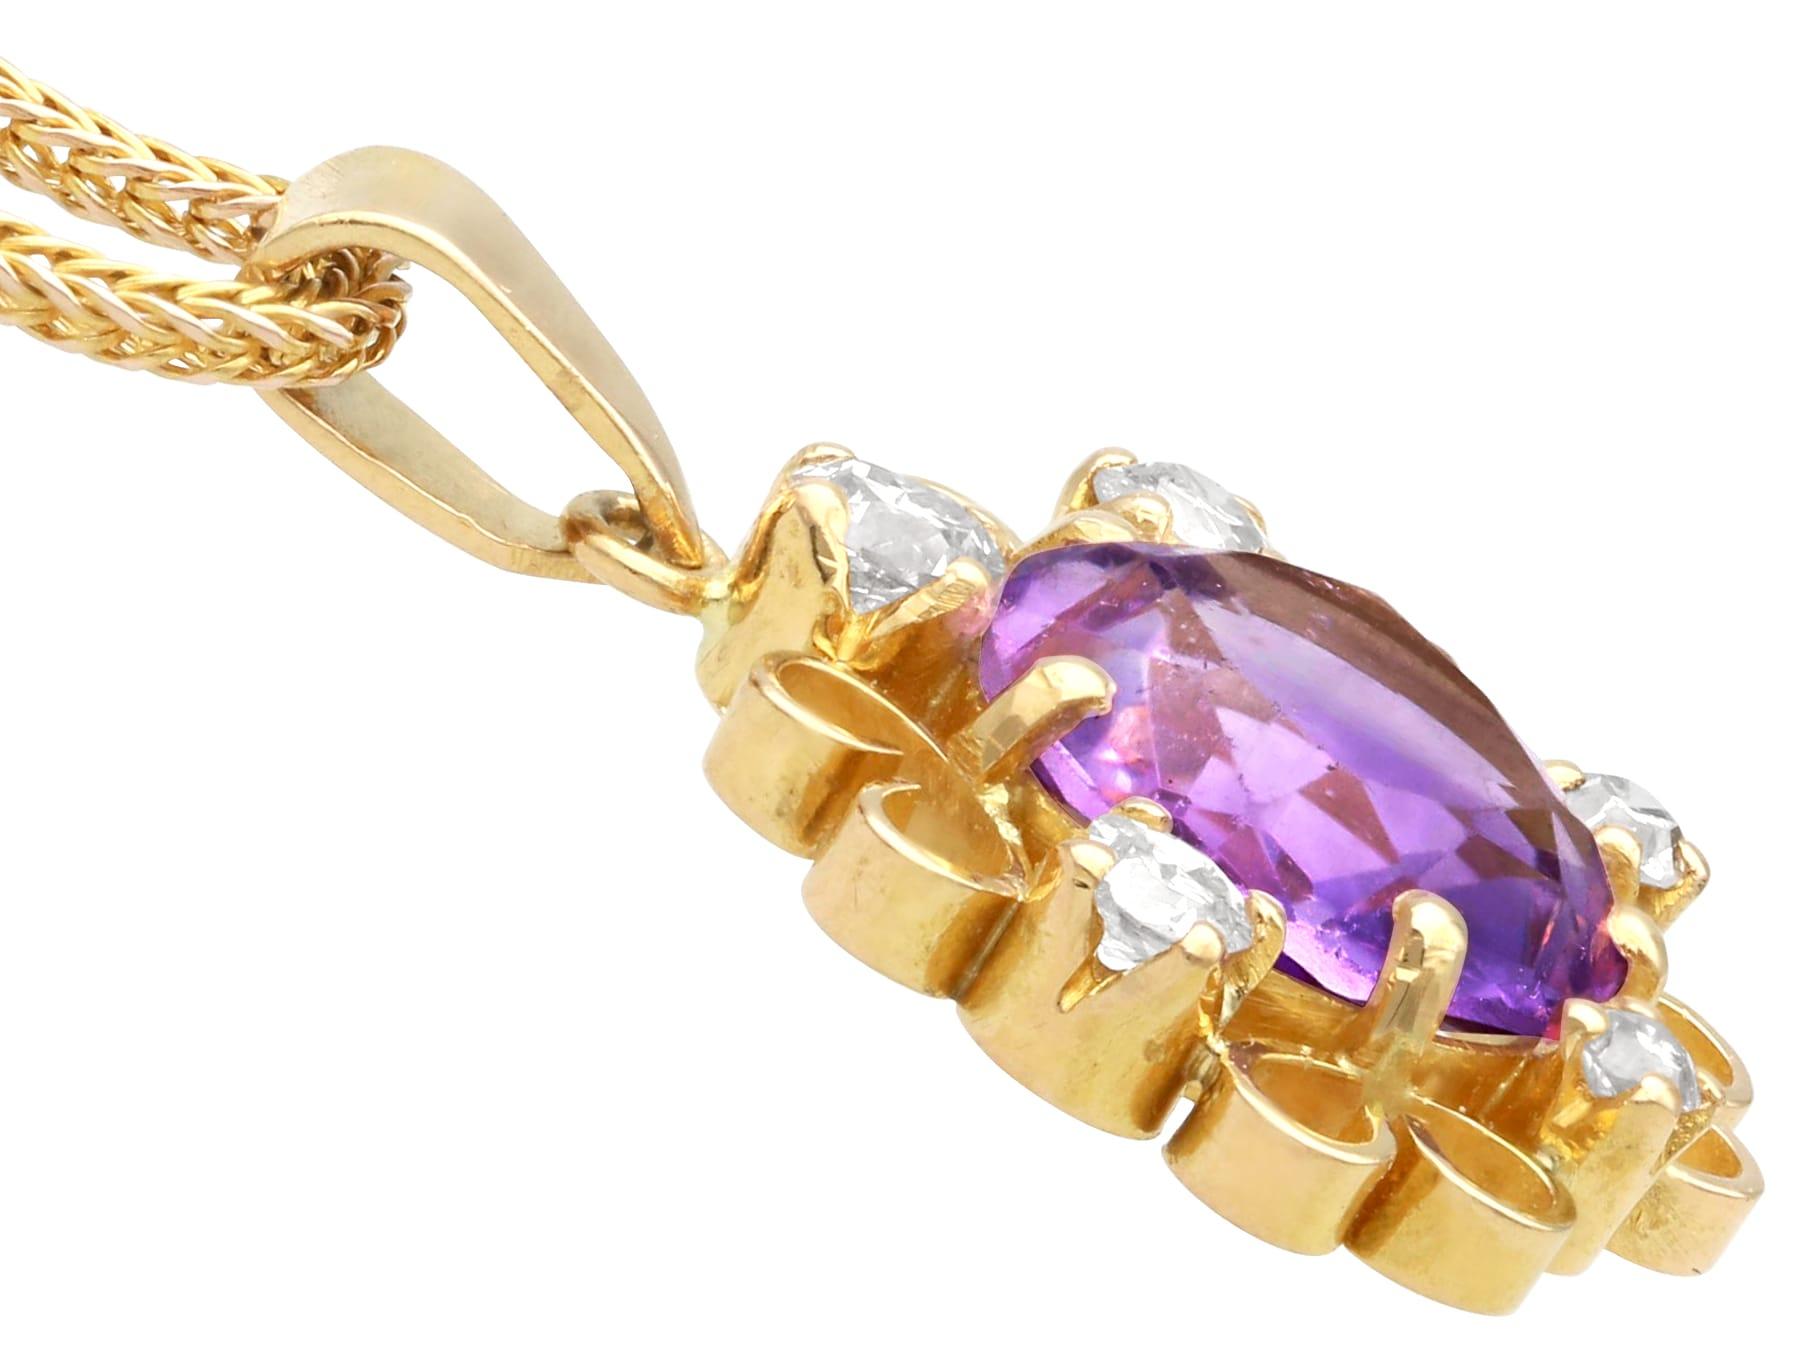 Antique 1.63 Carat Amethyst and Diamond Yellow Gold Pendant, circa 1920 In Excellent Condition For Sale In Jesmond, Newcastle Upon Tyne